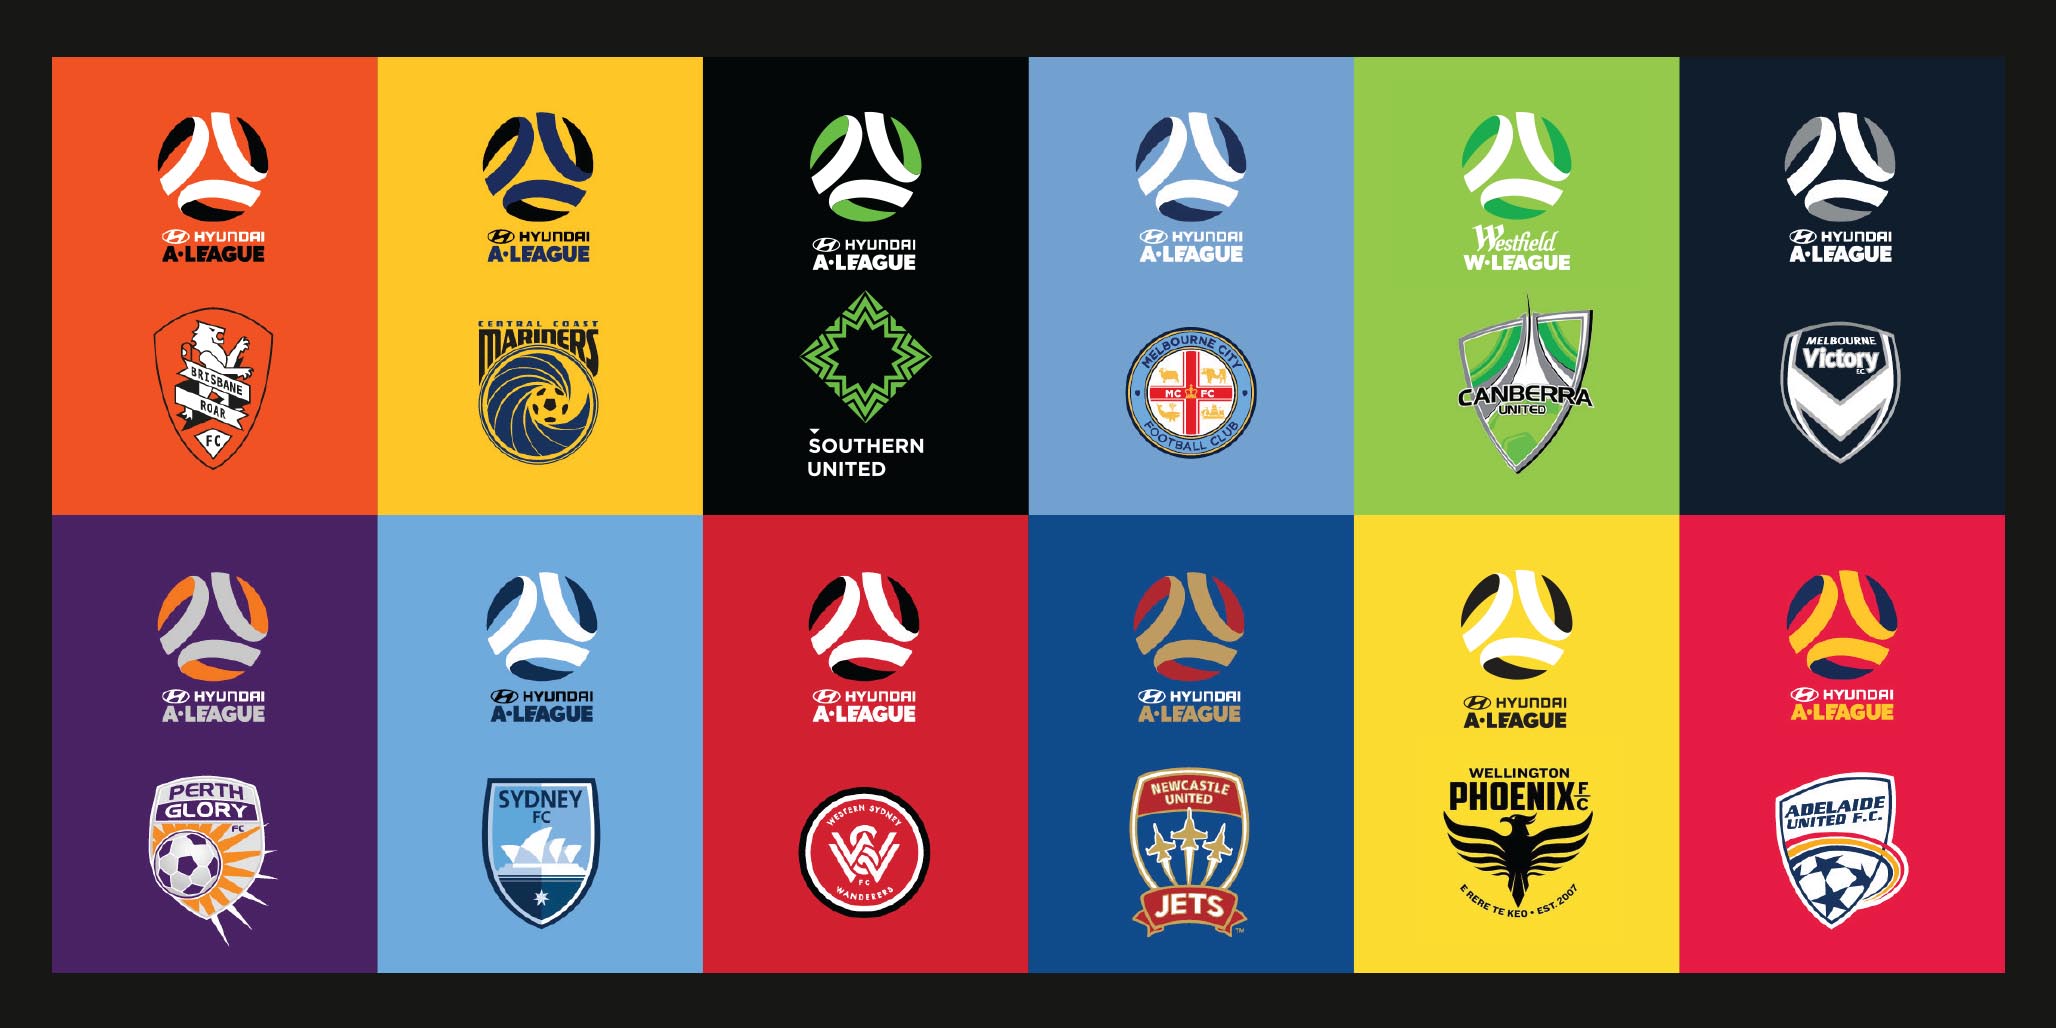 Sports Brand Identity Design by Branding Agency Percept in Sydney for a professional football club in Australia, image E